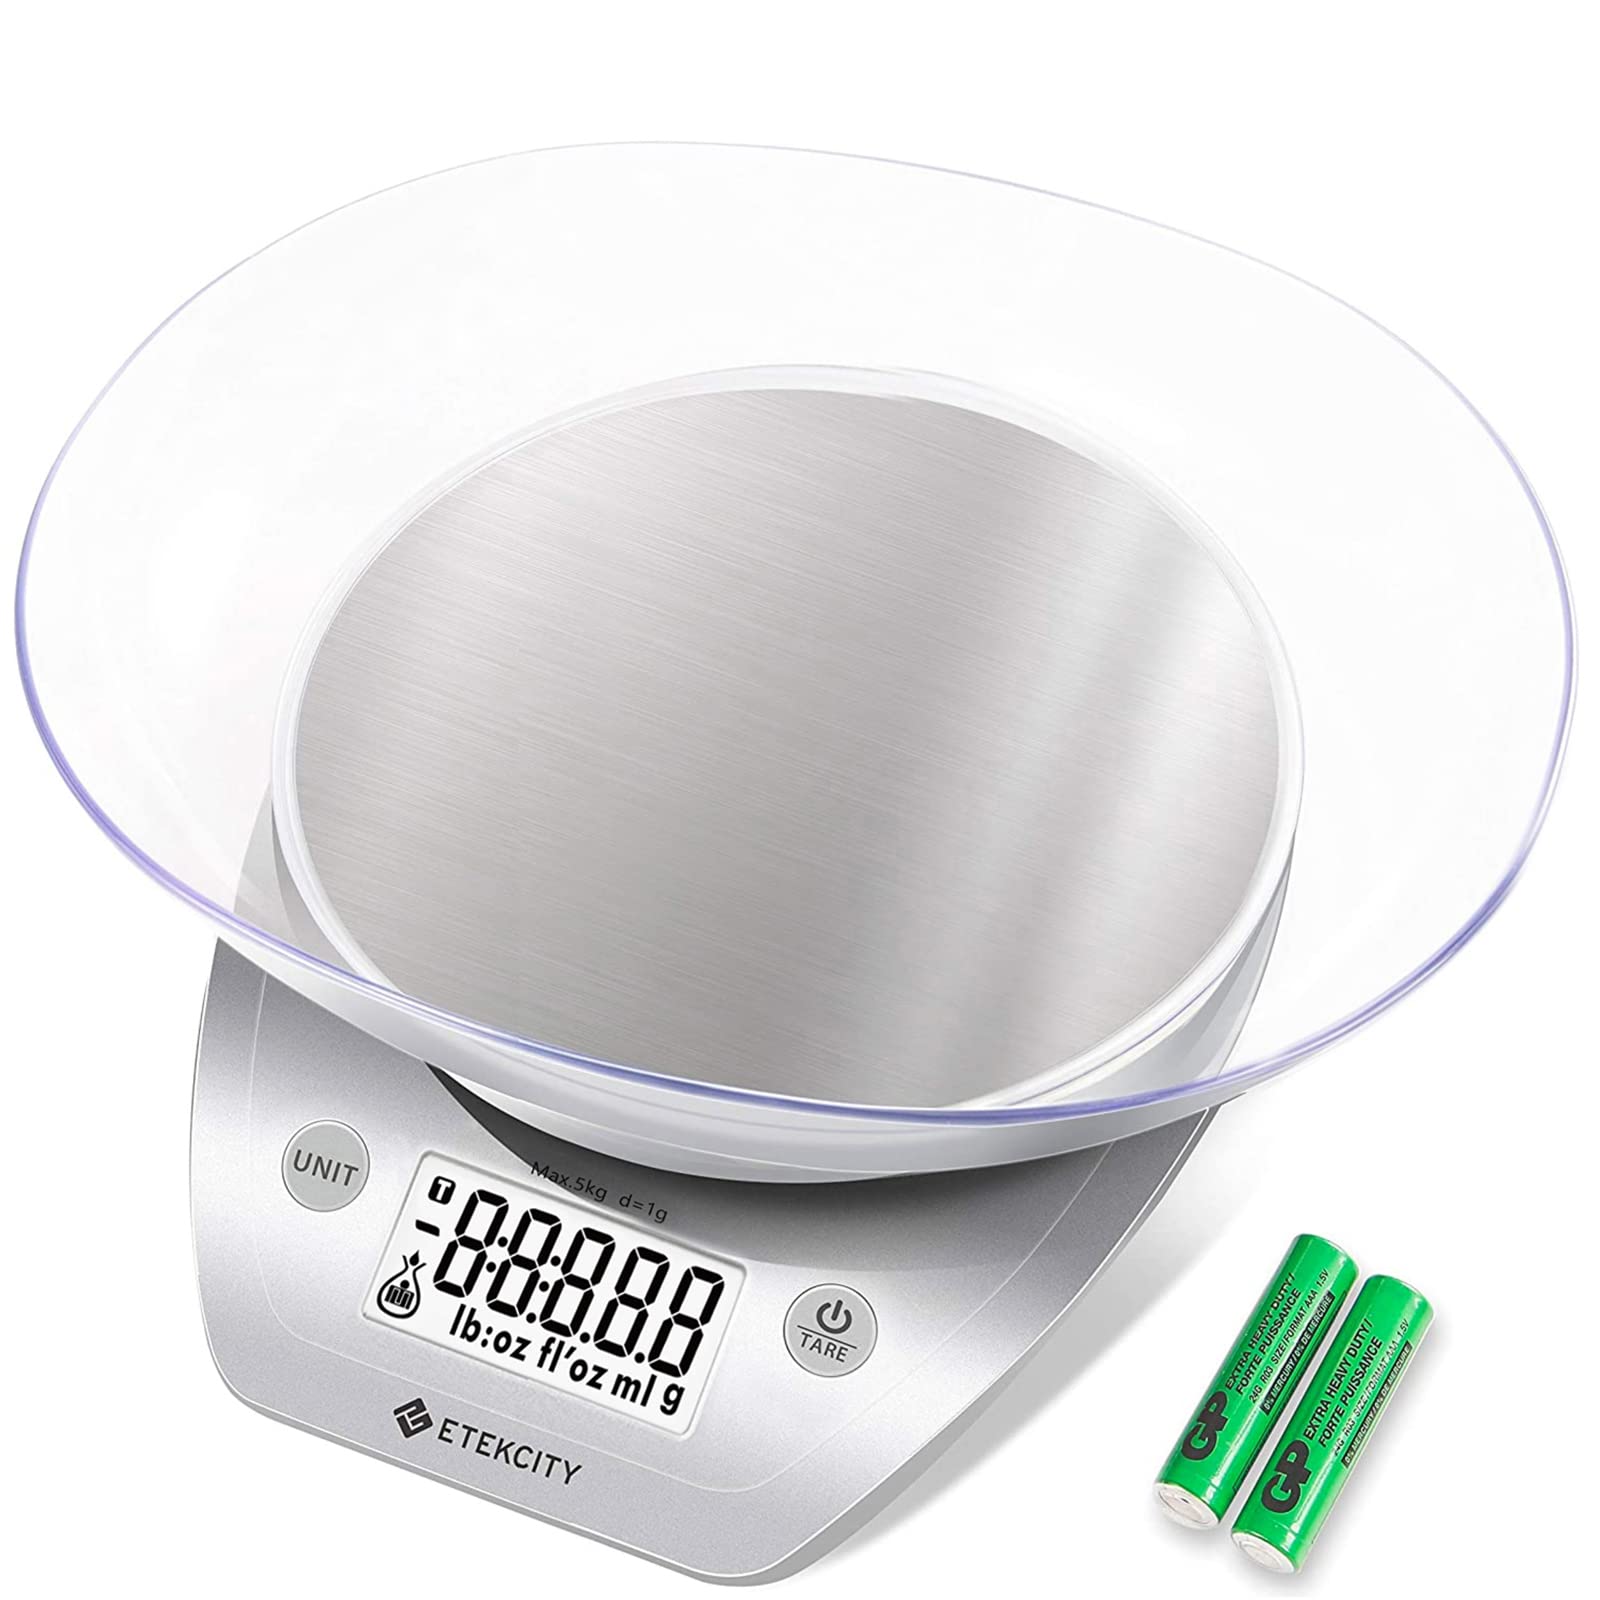 Etekcity 0.1g Food Kitchen Scale, 11lb/5kg, Stainless Steel Silver & Smart Scale for Body Weight, Accurate to 0.05lb (0.02kg) Digital Bathroom Weighing Machine, 400lb